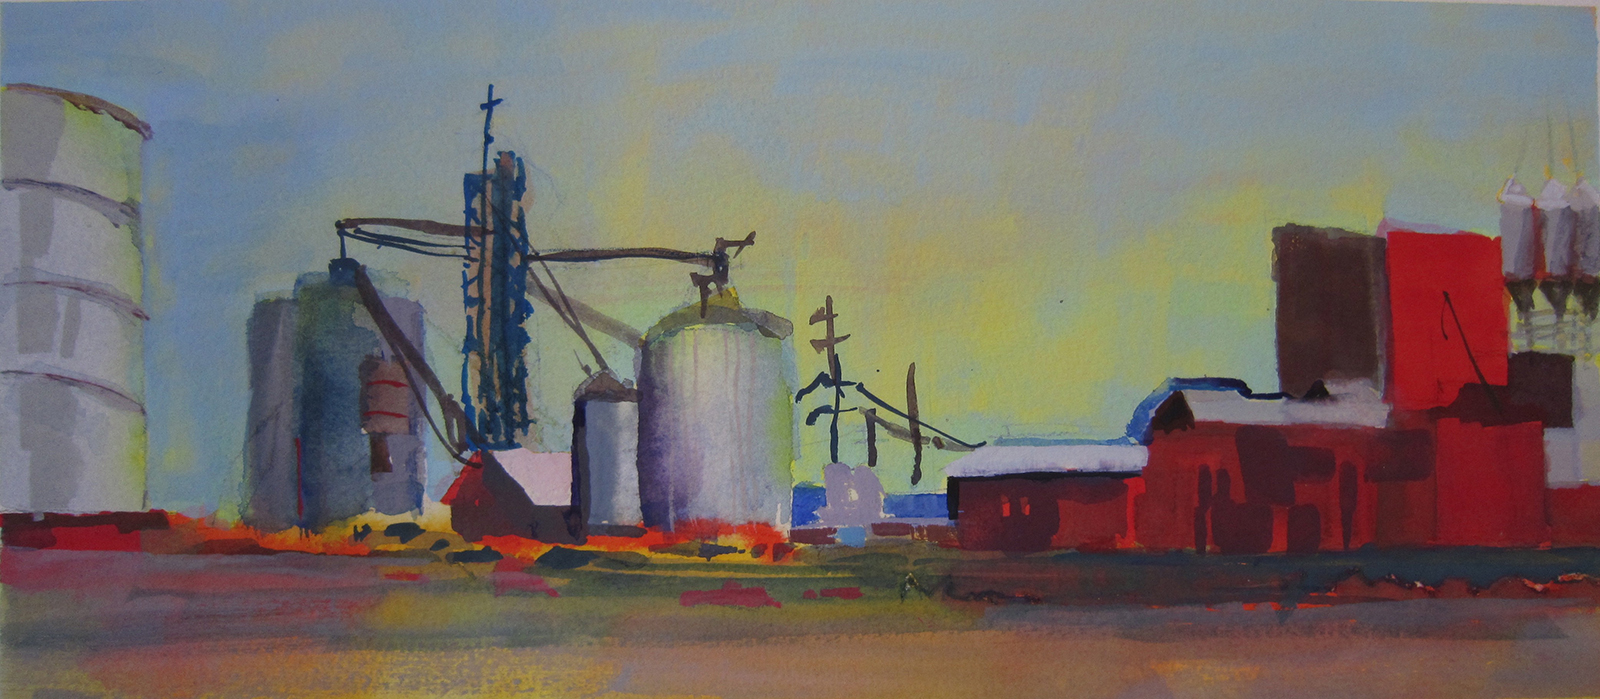 WEST TEXAS - watercolor,  11" x 5", SOLD